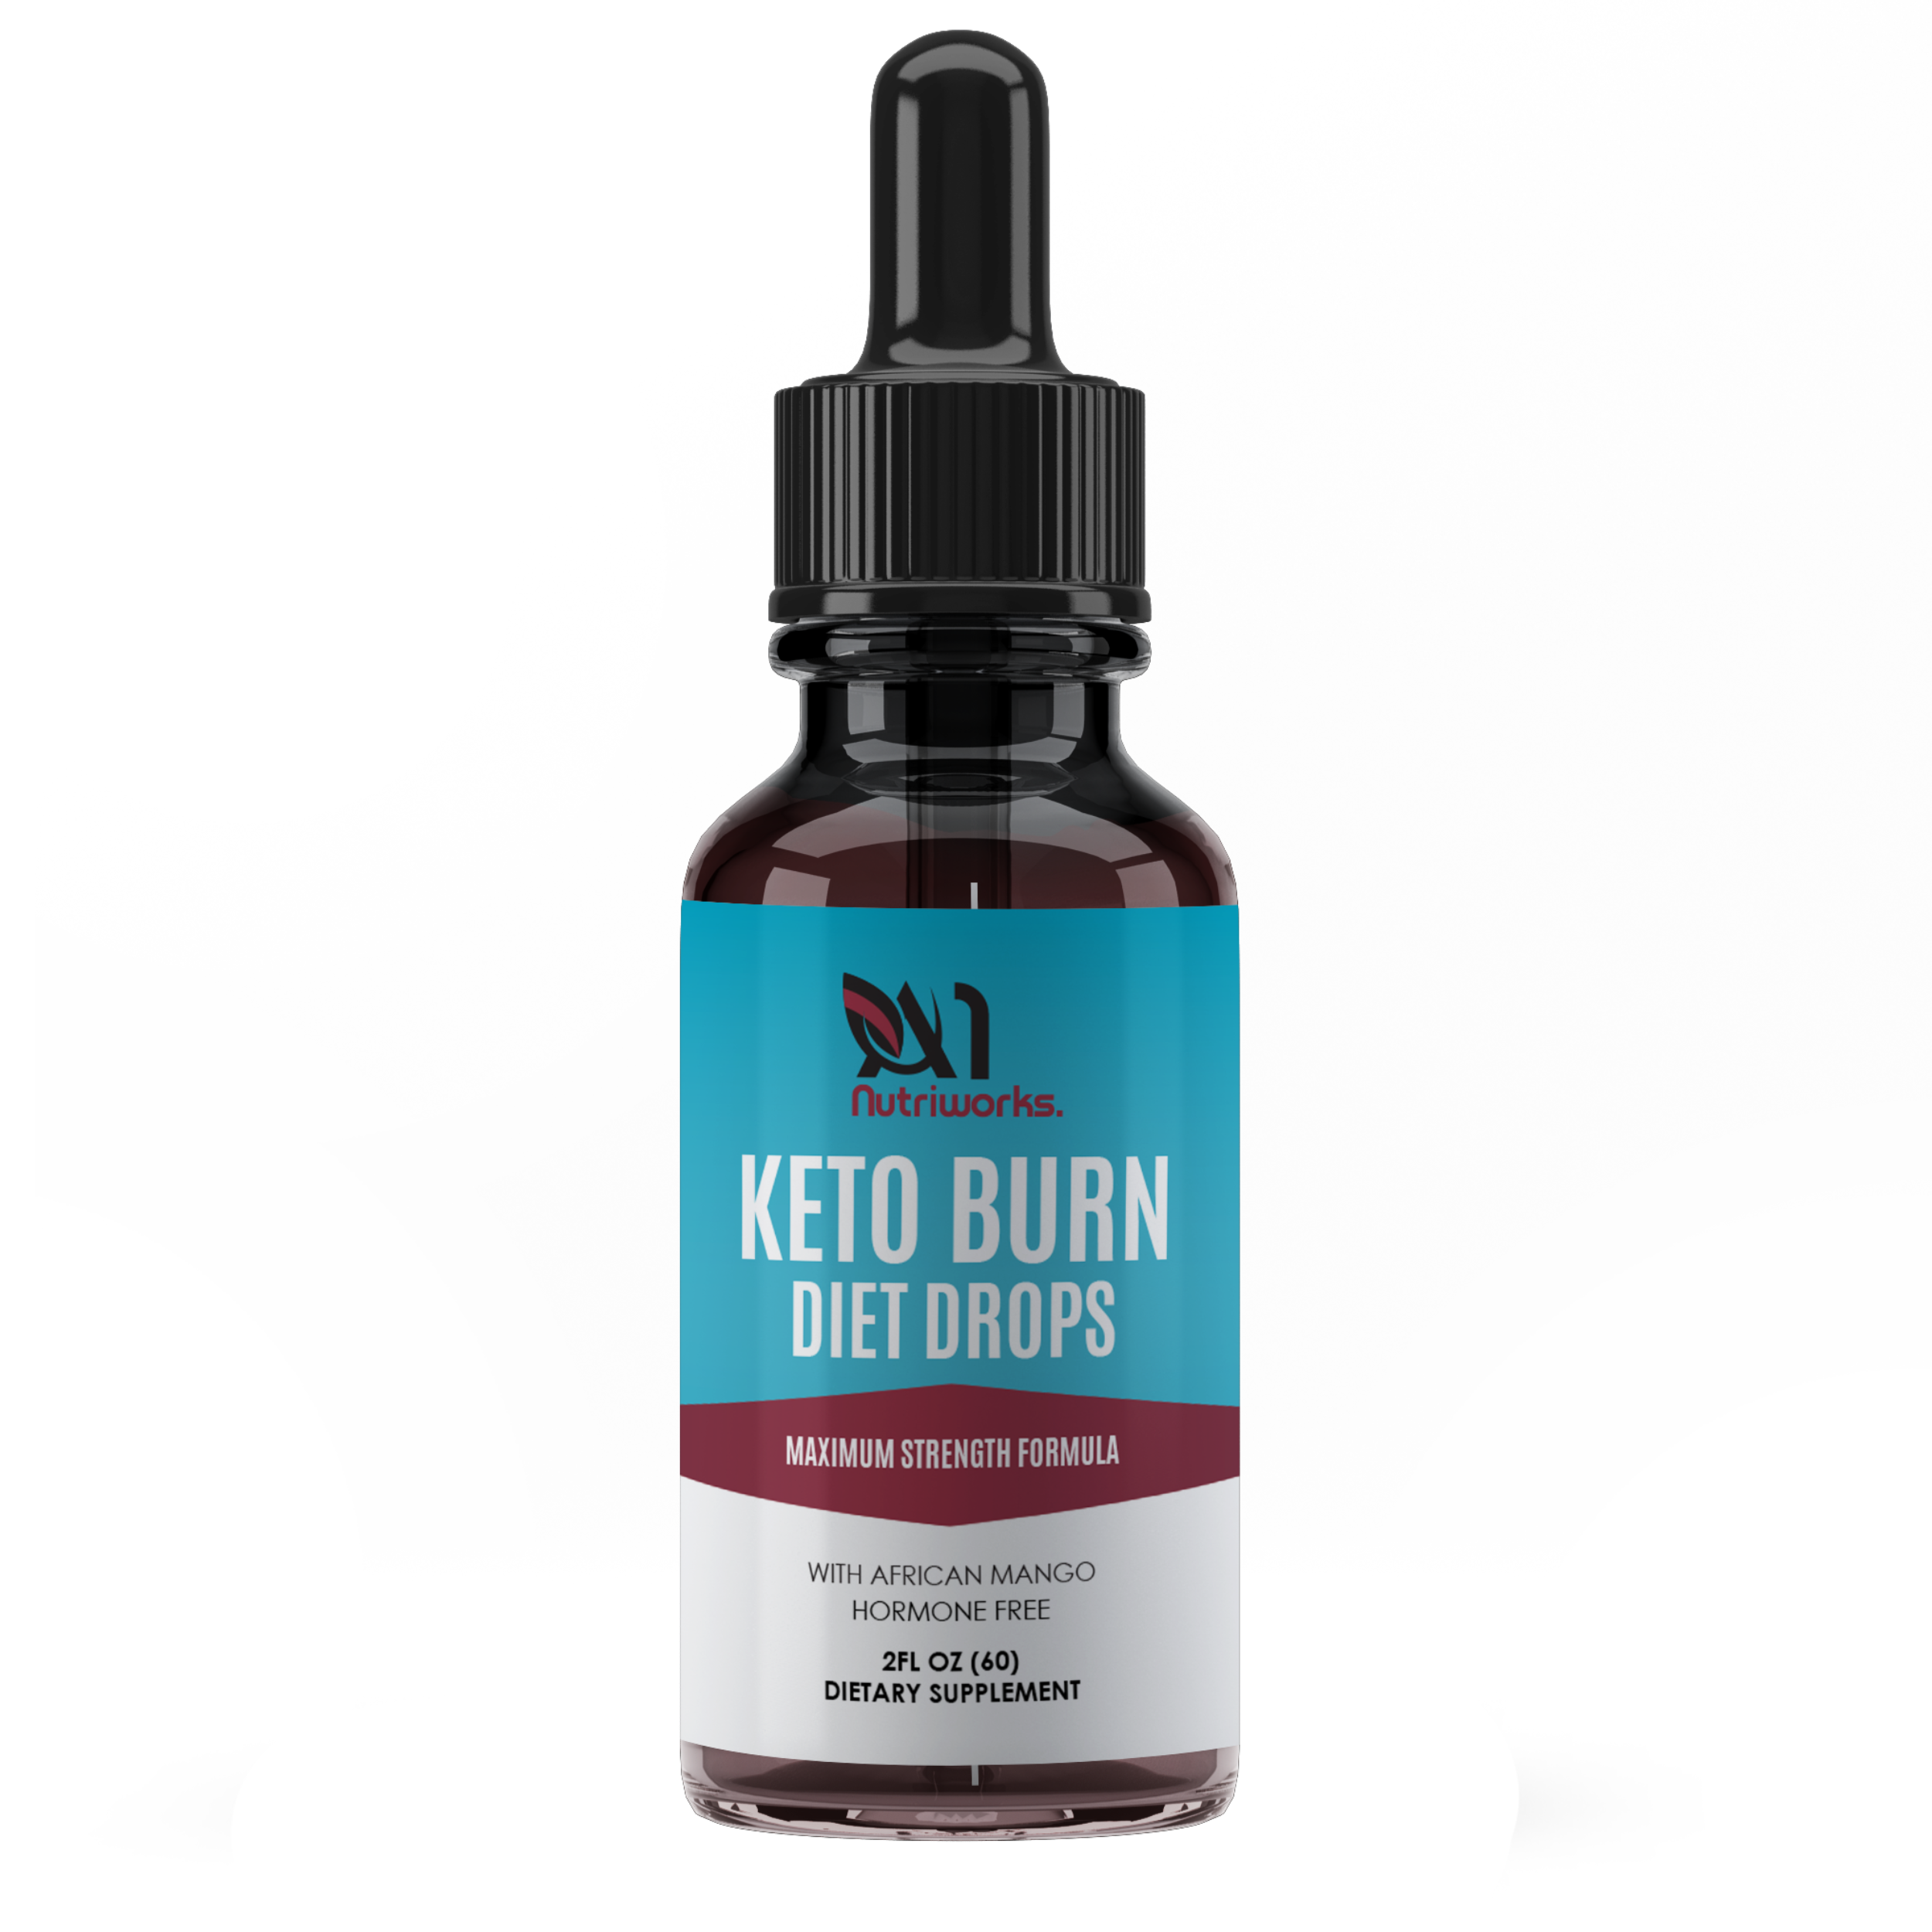 3 Month Supply - Keto Burn Diet Drops - Weight Loss Supplement Fat Burn Appetite Metabolism Ketosis